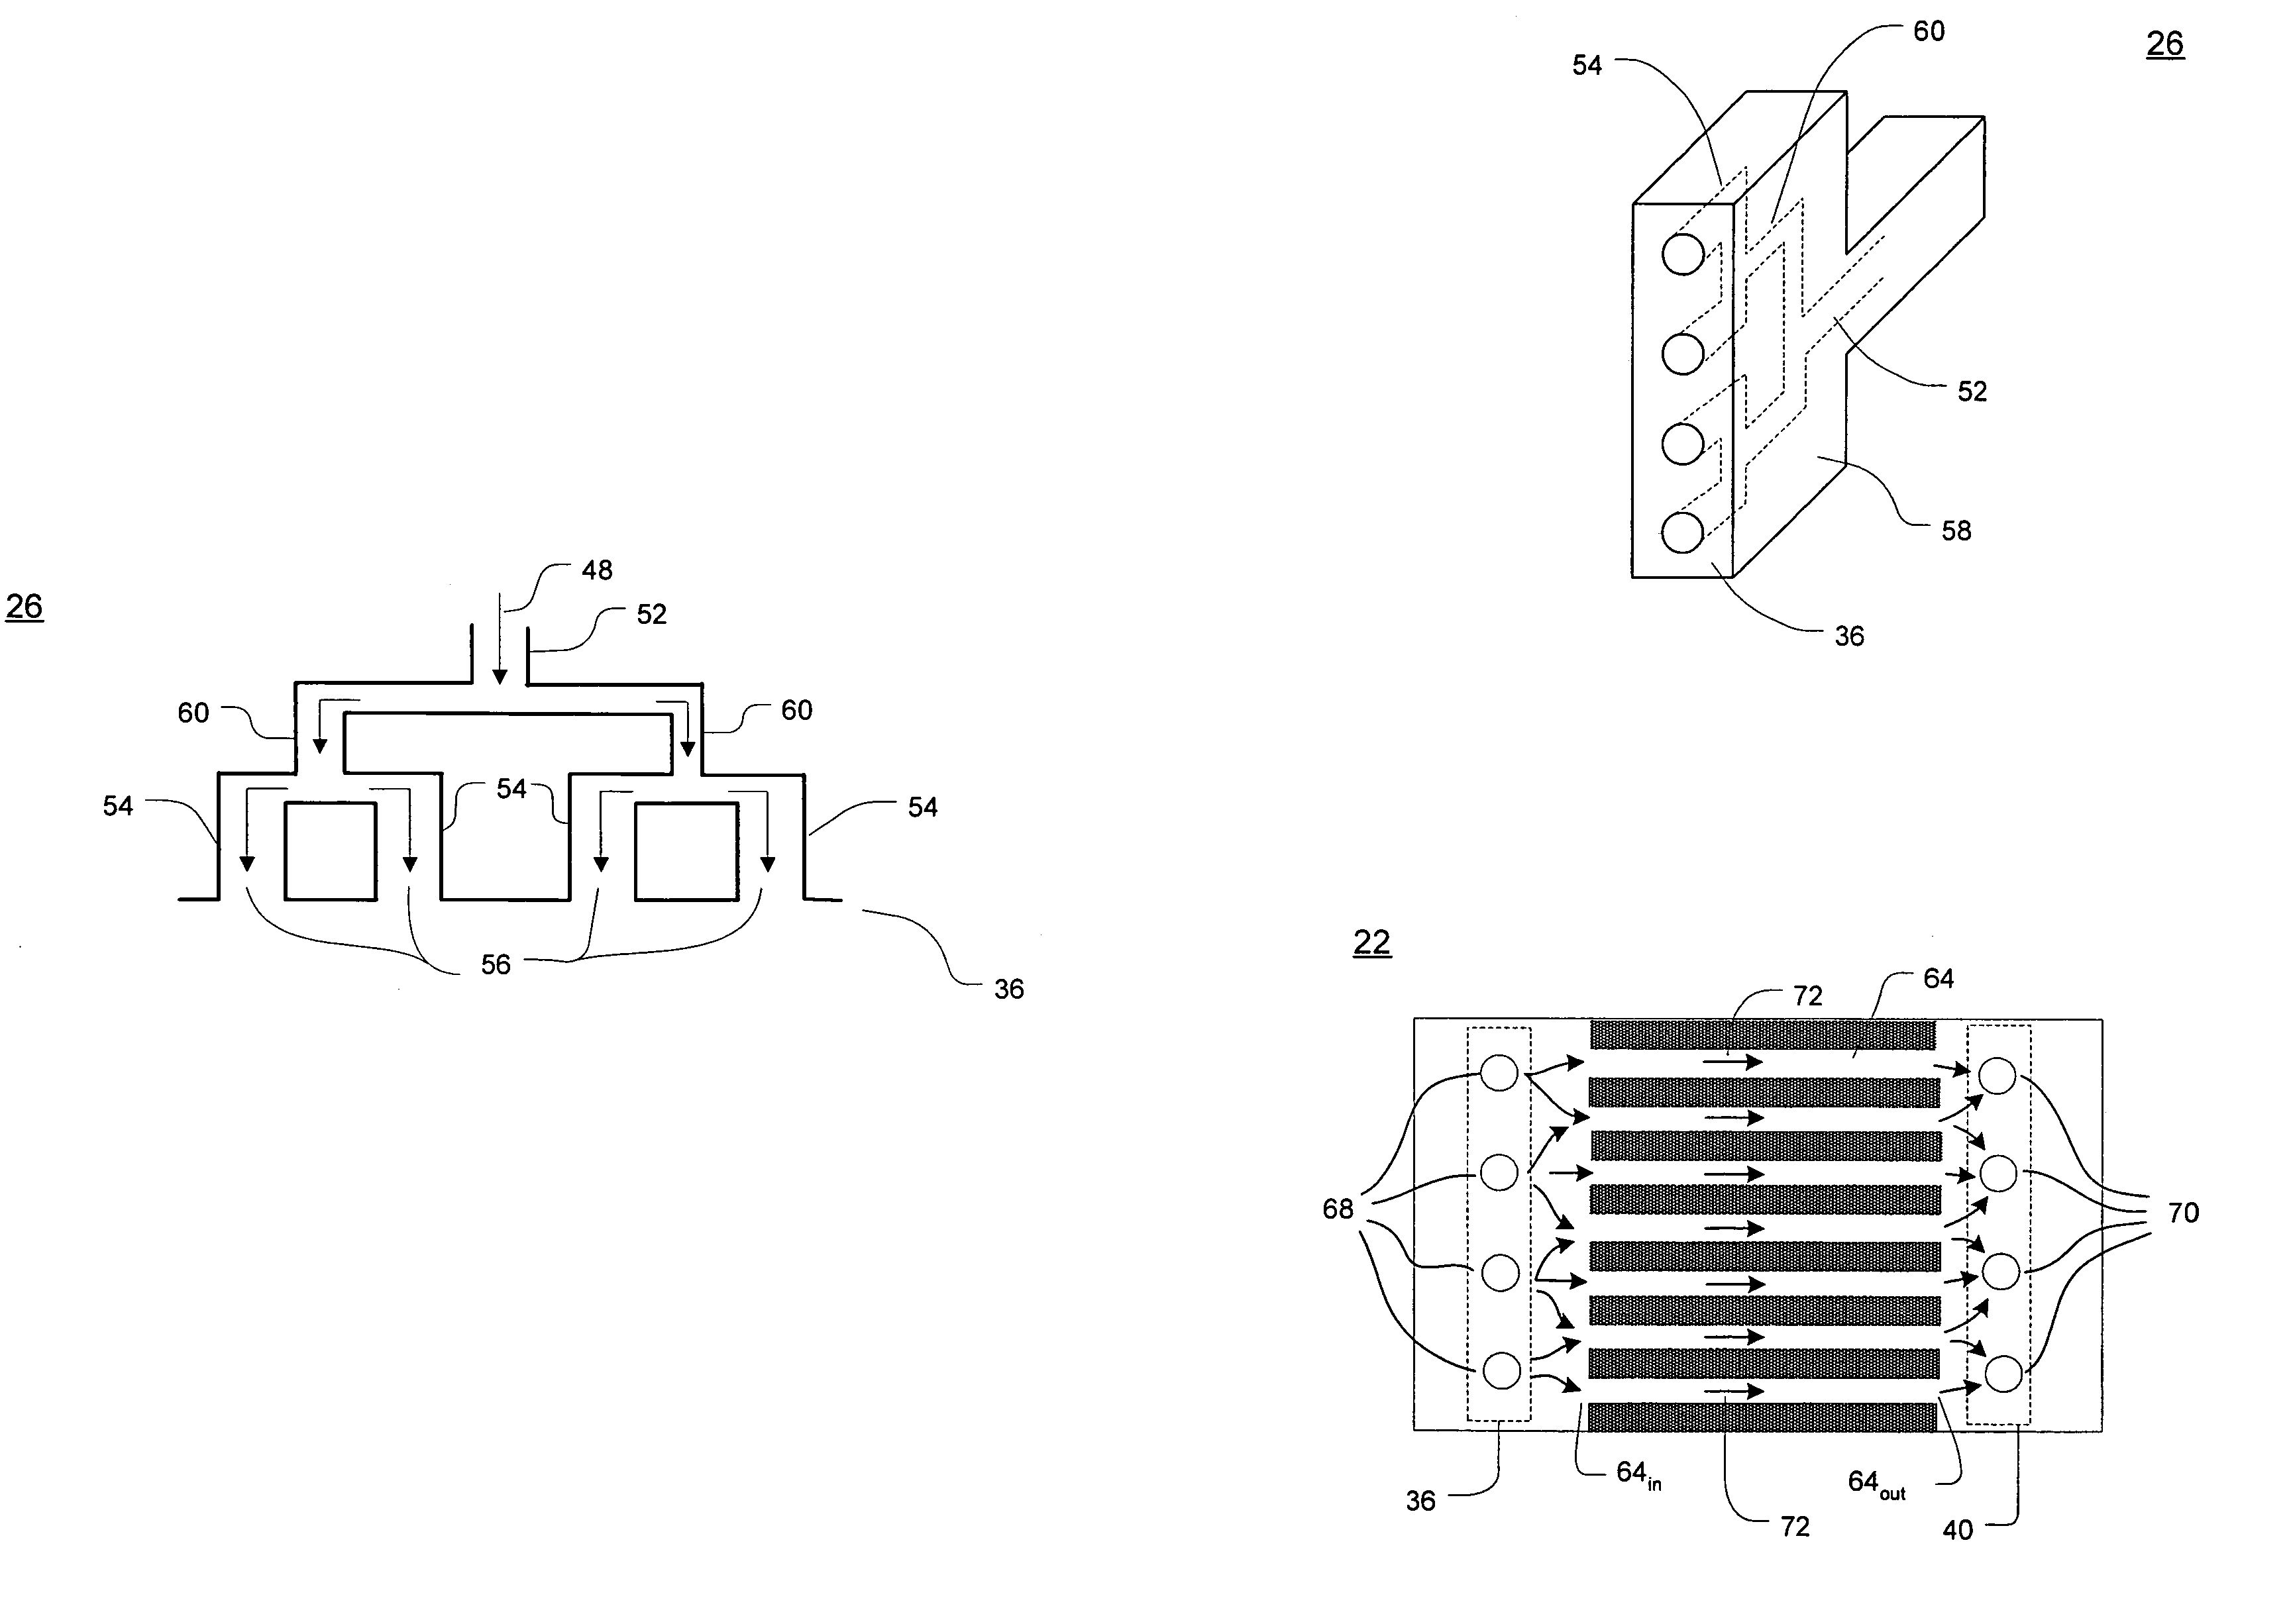 Method and apparatus for providing distributed fluid flows in a thermal management arrangement